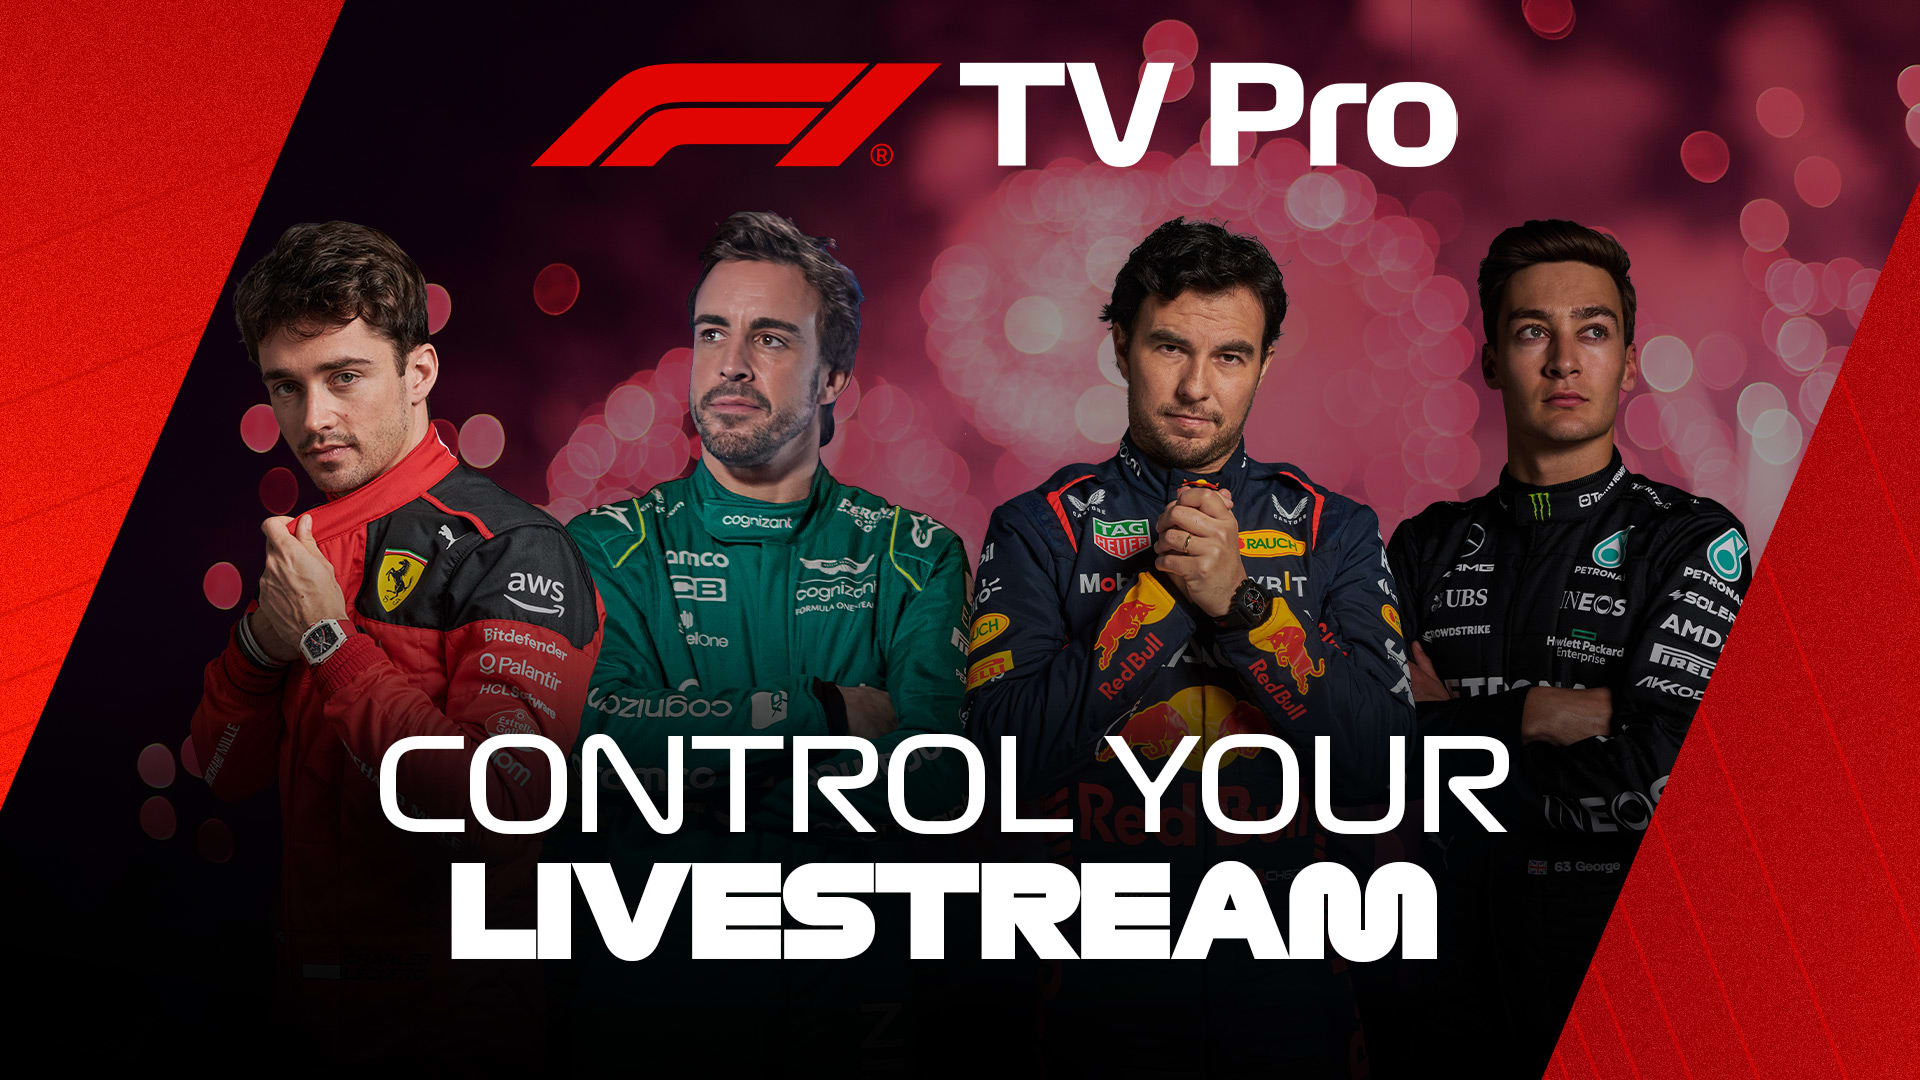 How to stream the 2023 United States Grand Prix on F1 TV Pro